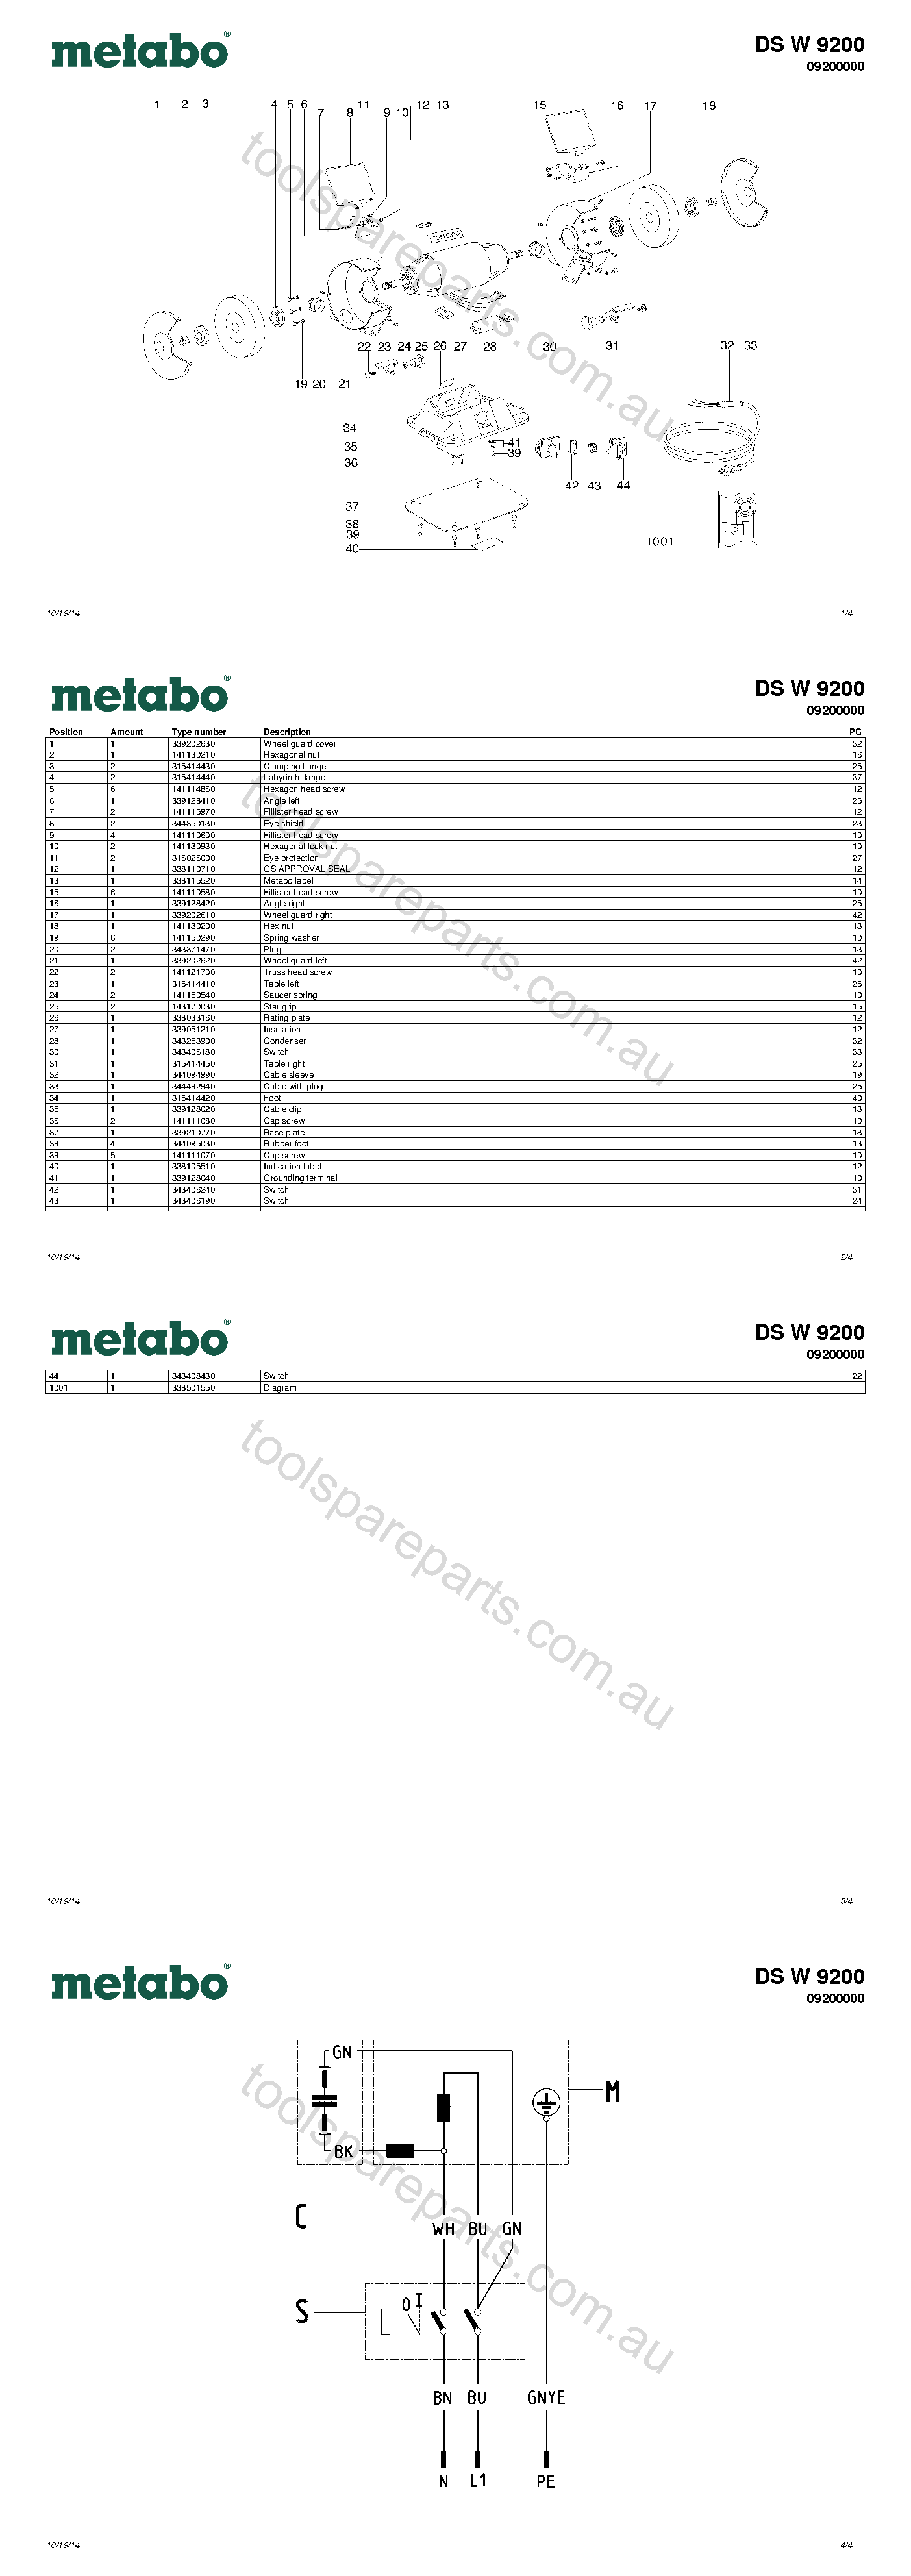 Metabo DS W 9200 09200000  Diagram 1